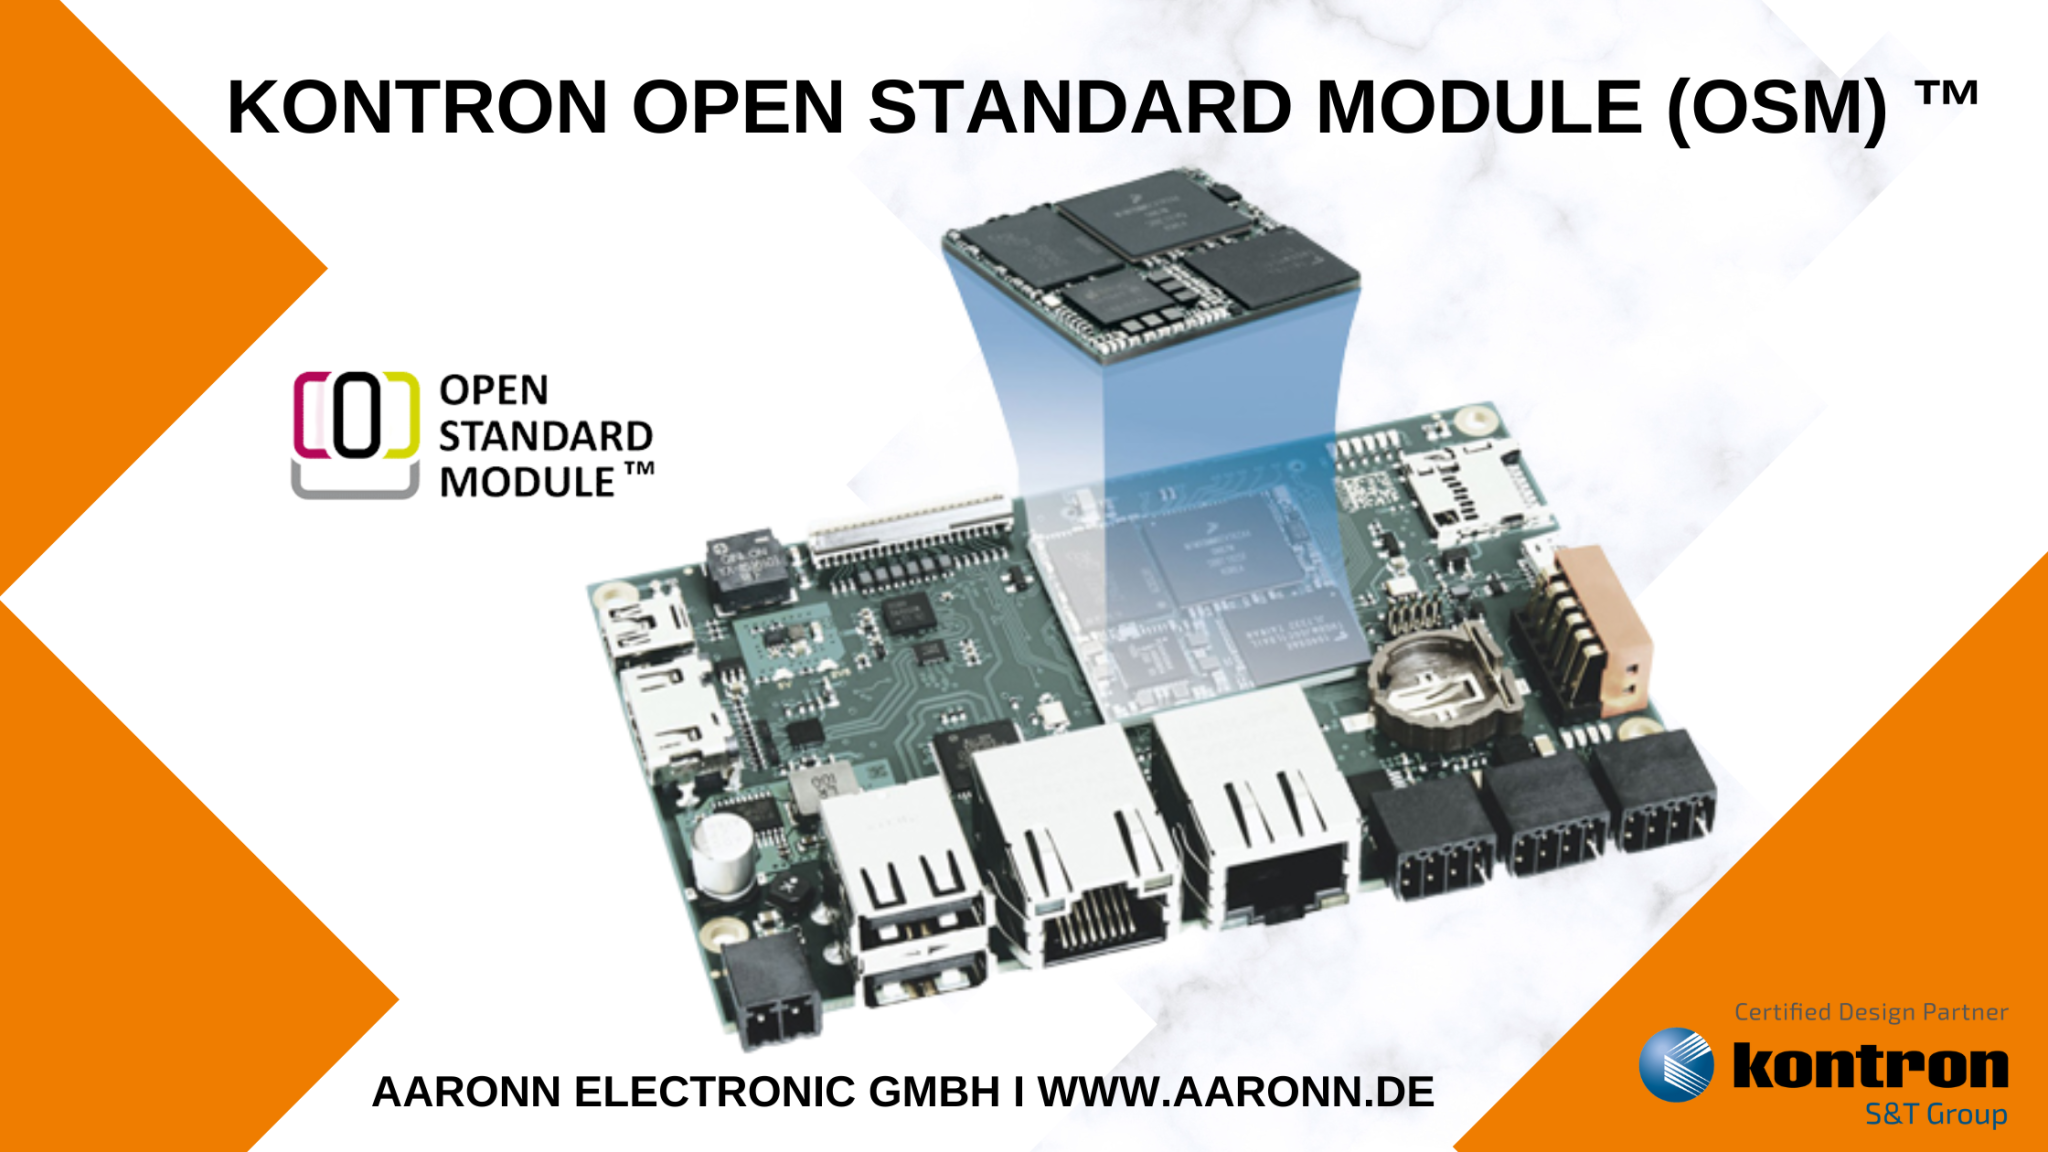 You are currently viewing Kontron Open Standard Modules at Aaronn Electronic GmbH